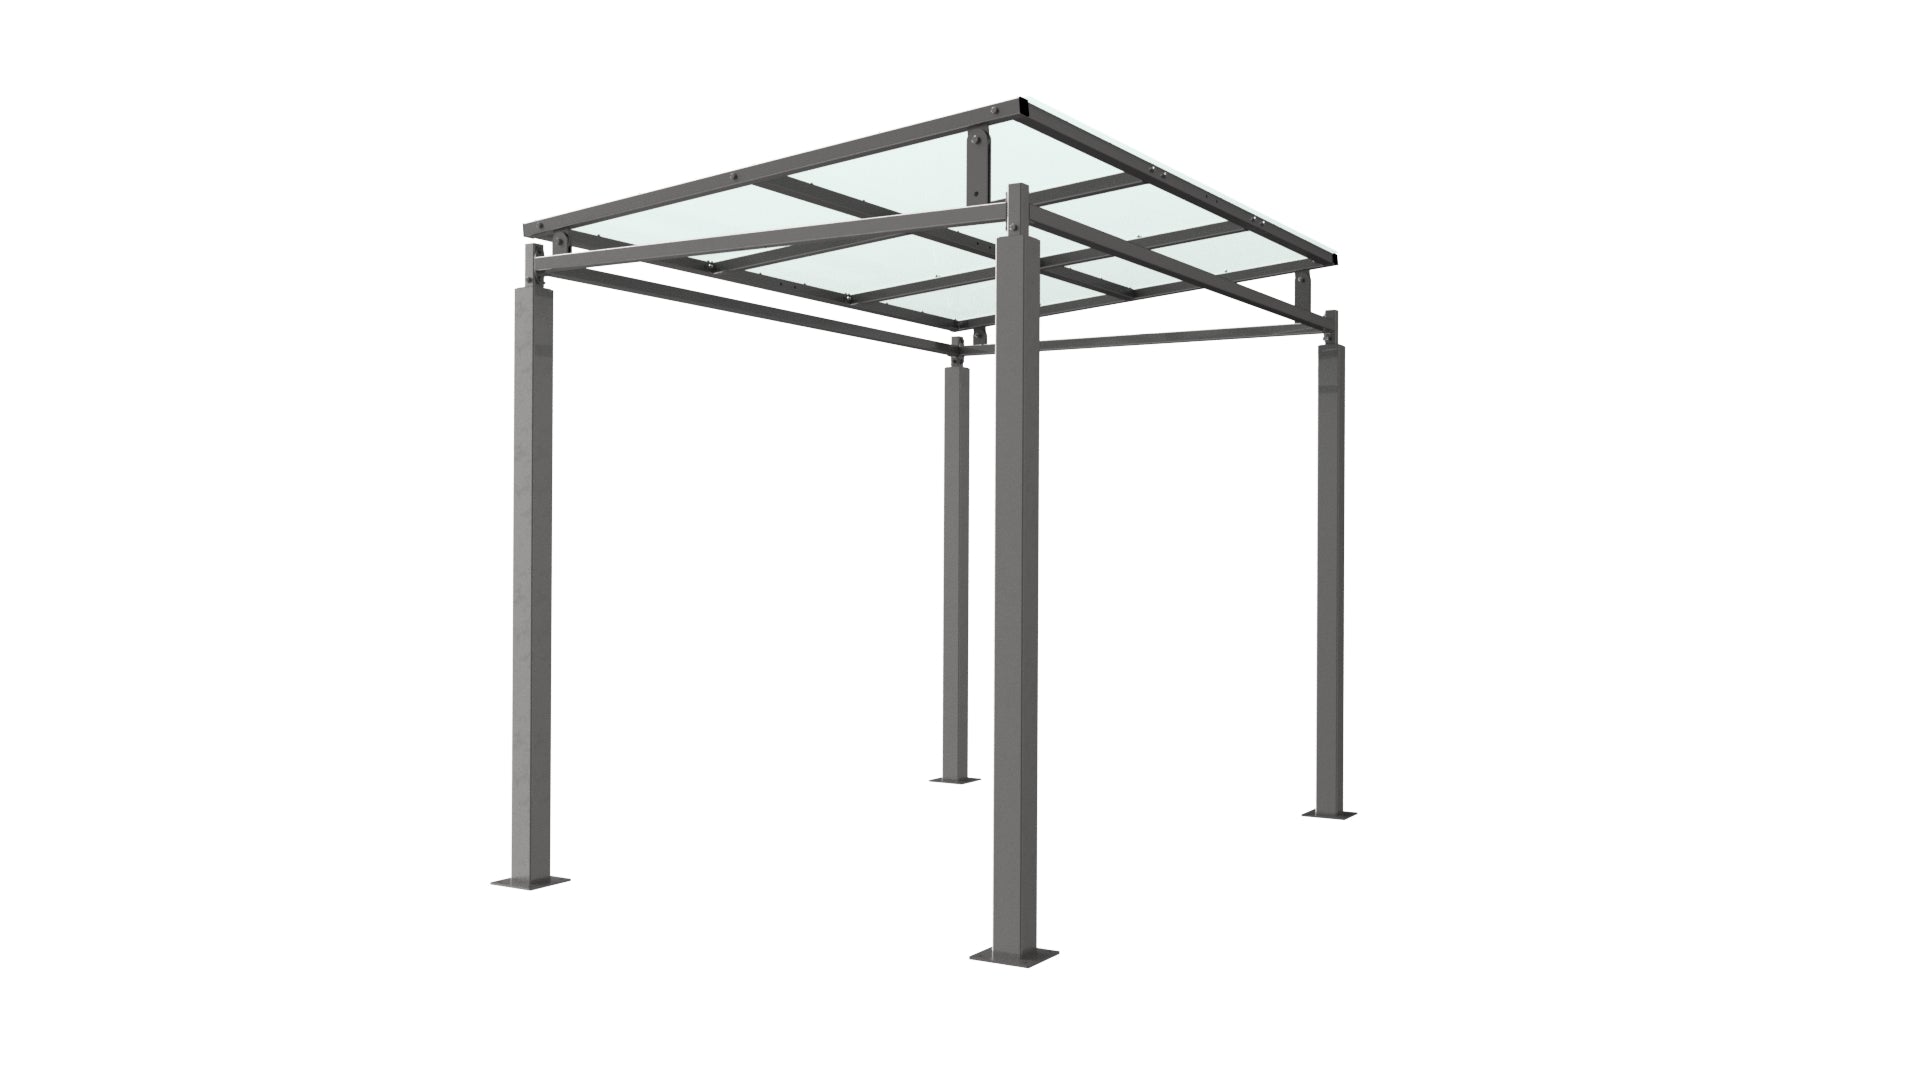 Bedford Cycle/Smoking Shelter Galvanised Steel Frame With PETG Roof